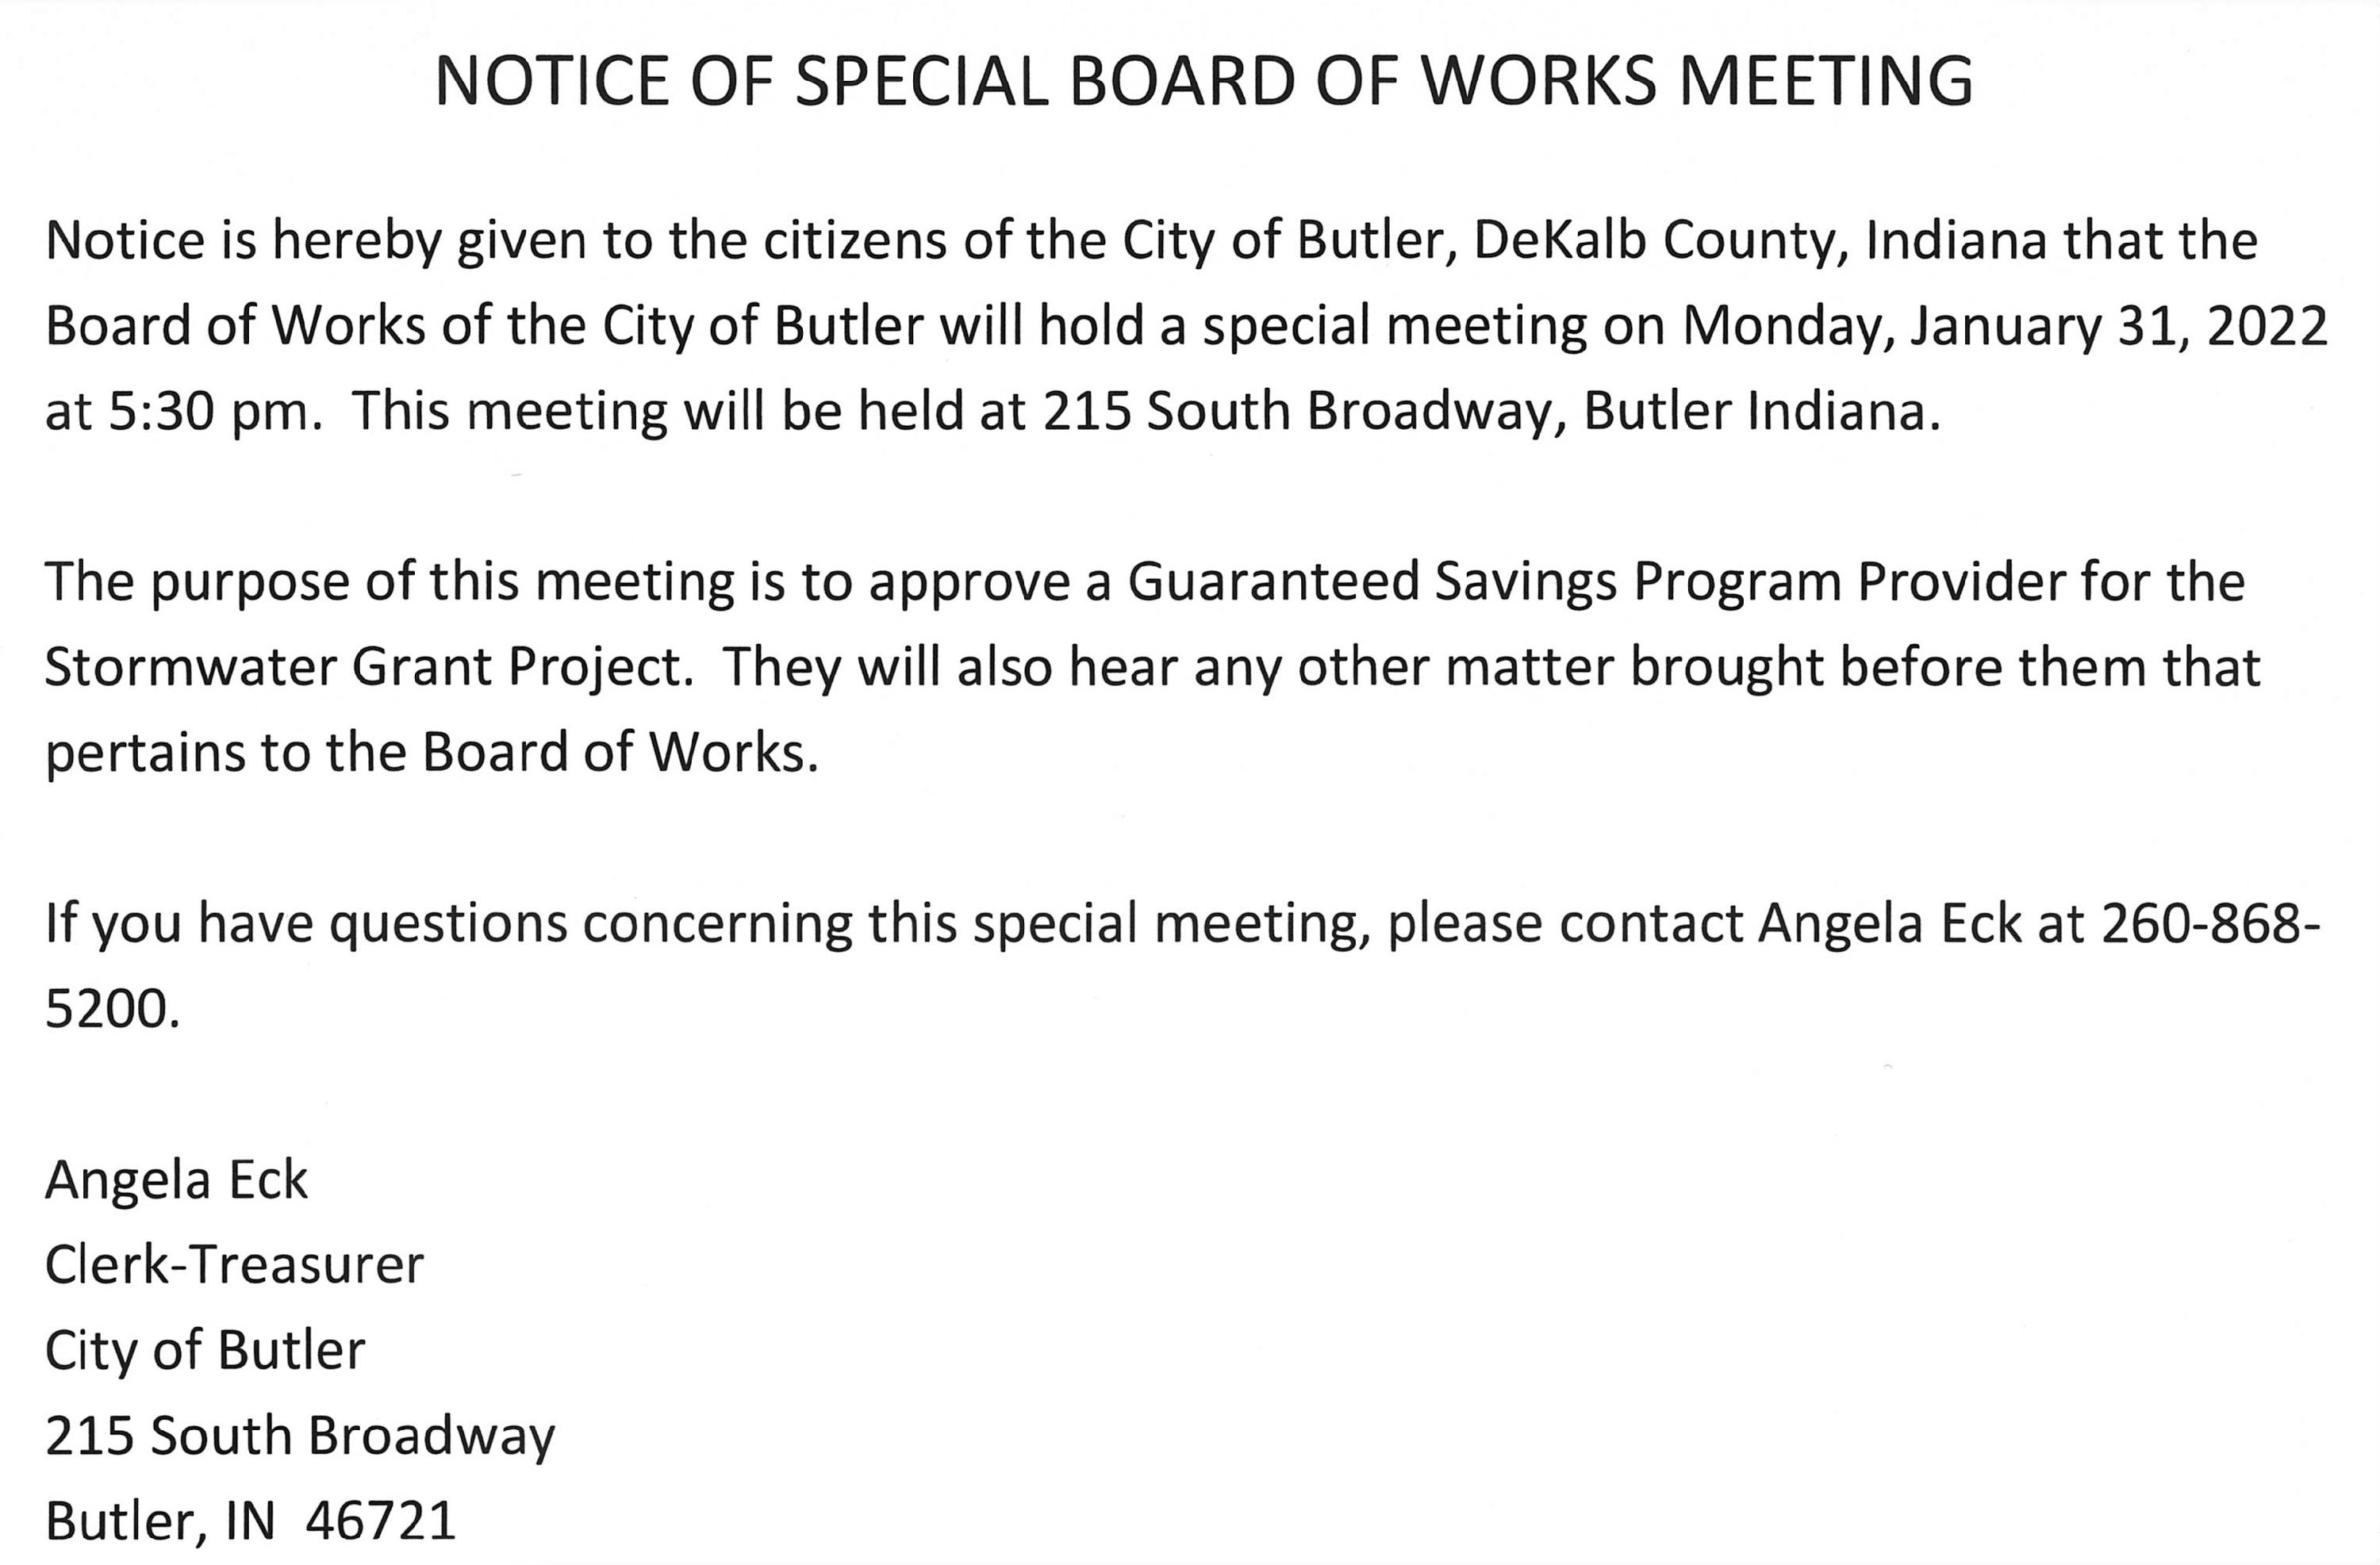 Notice of Special Board of Works Meeting - 1-31-2022